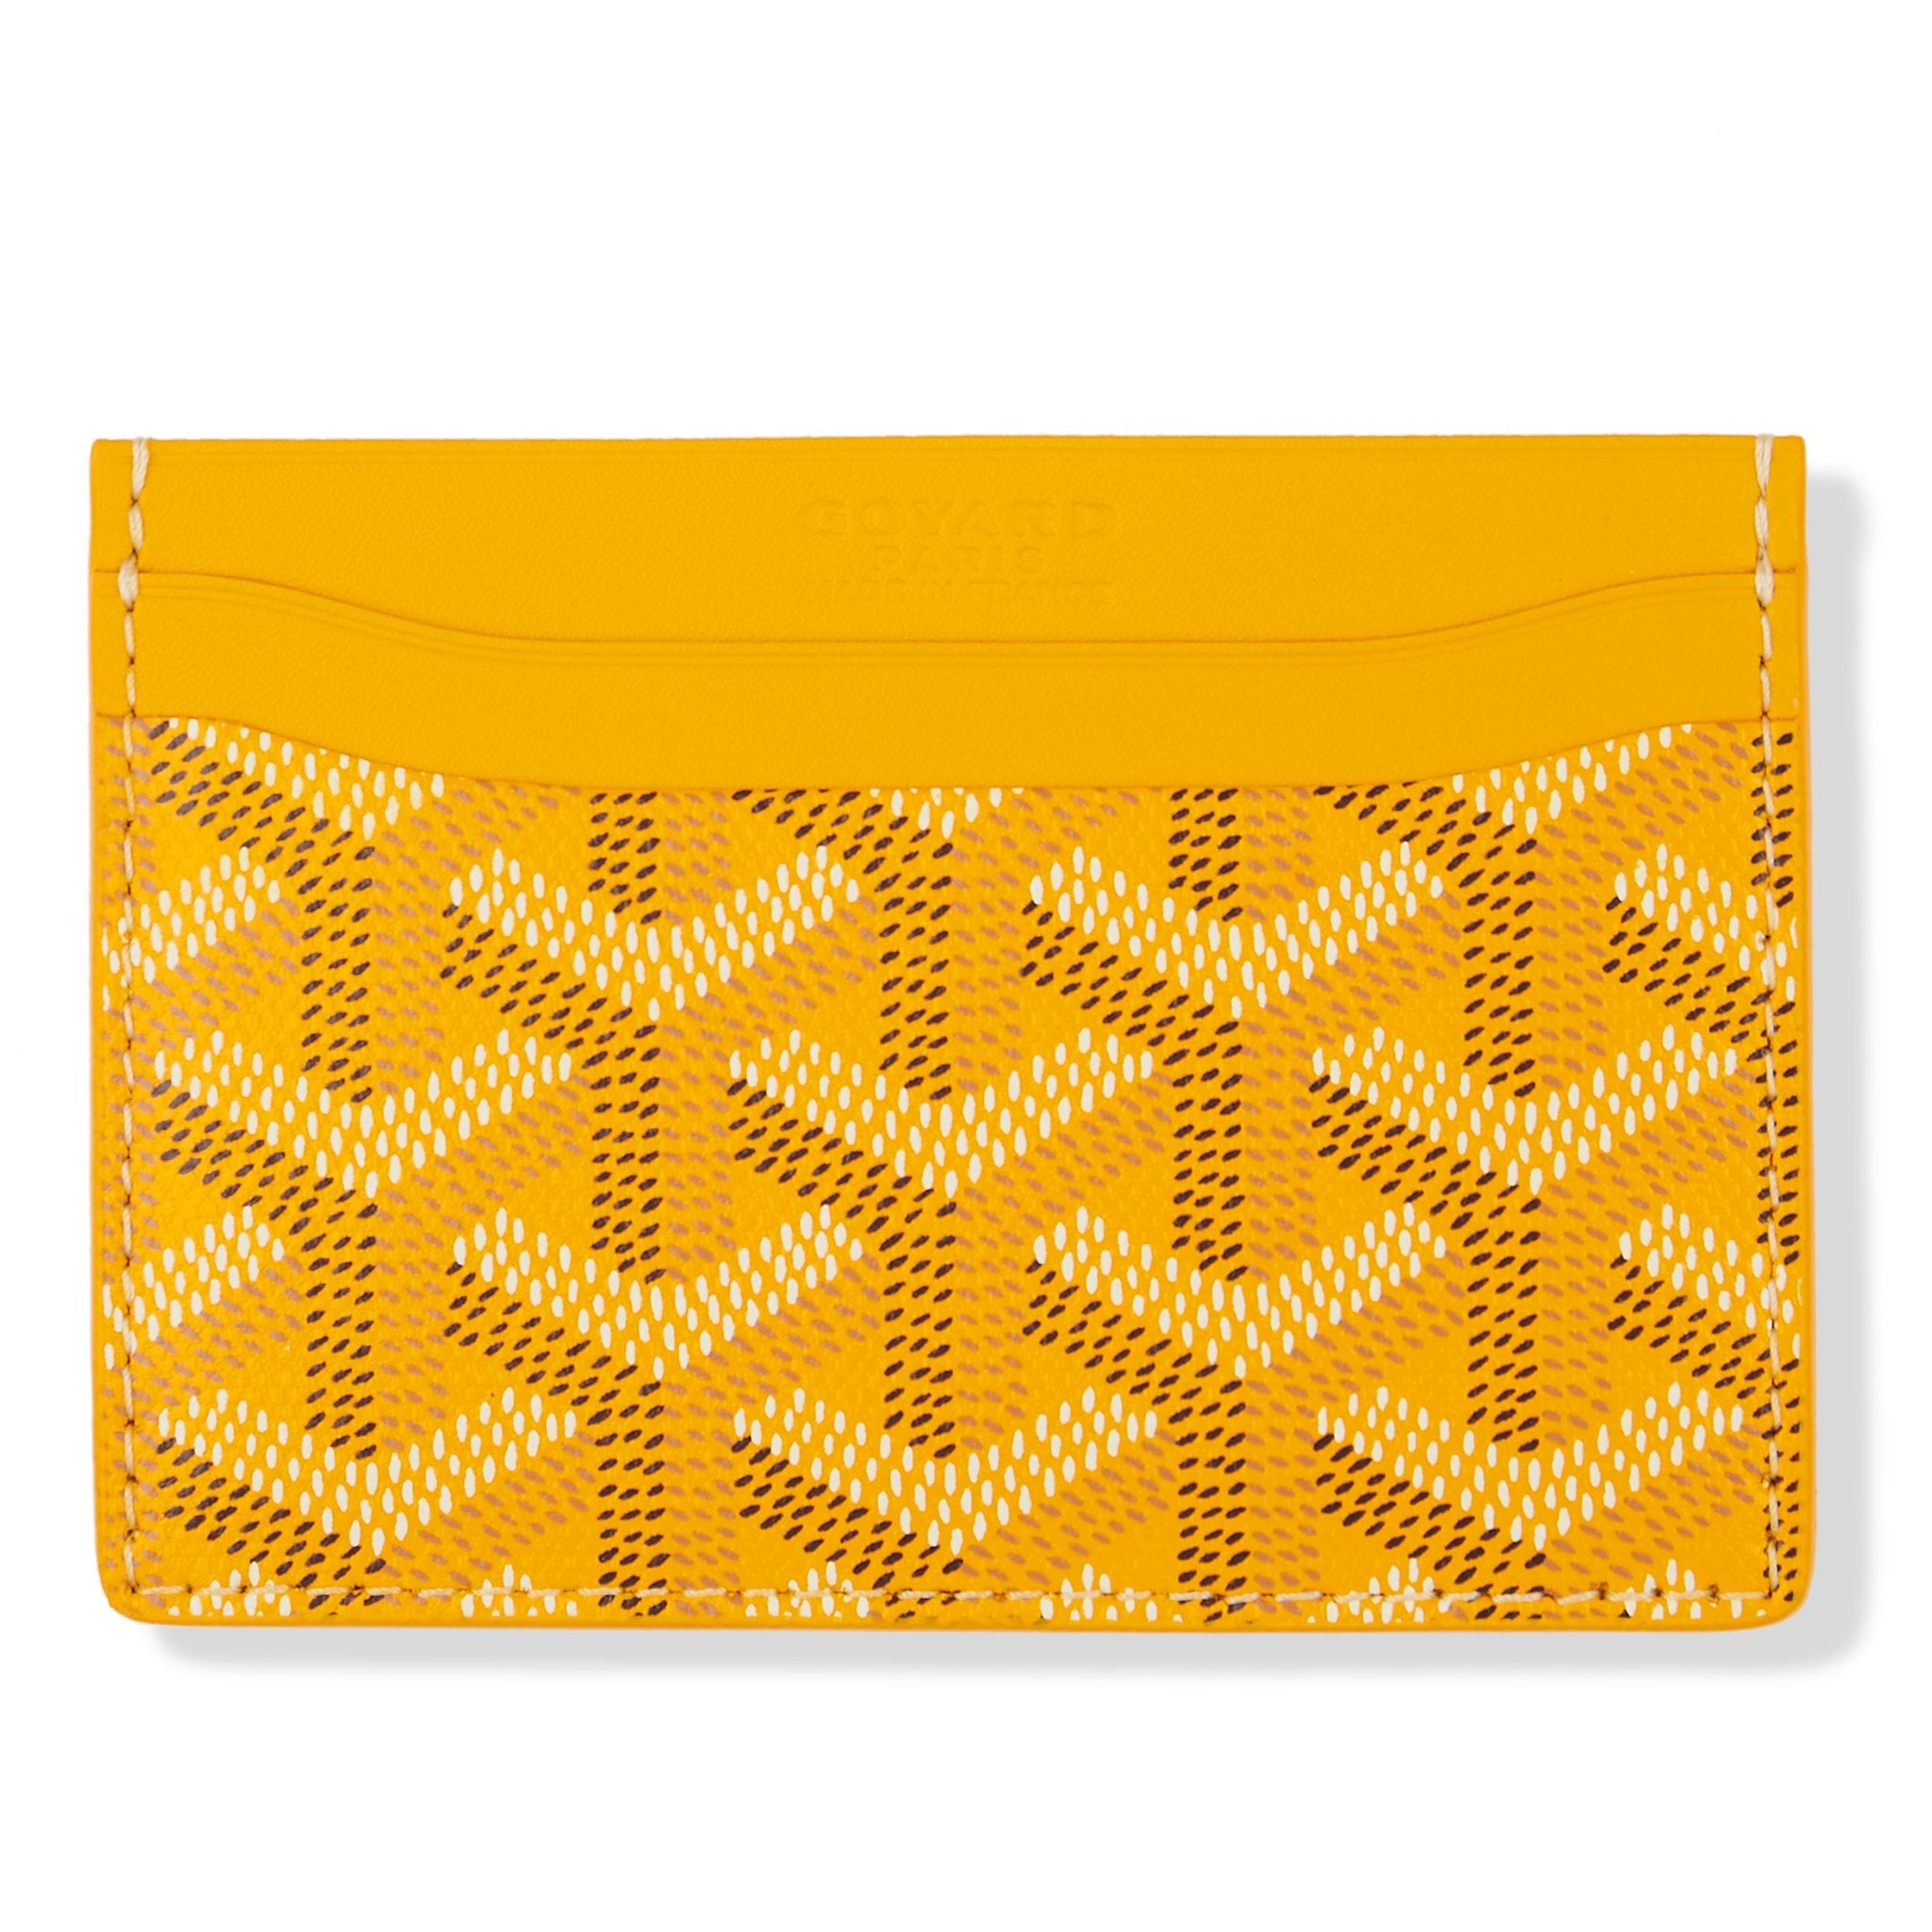 Step 1: Inspect the Y pattern on the Goyard Saint Sulpice card